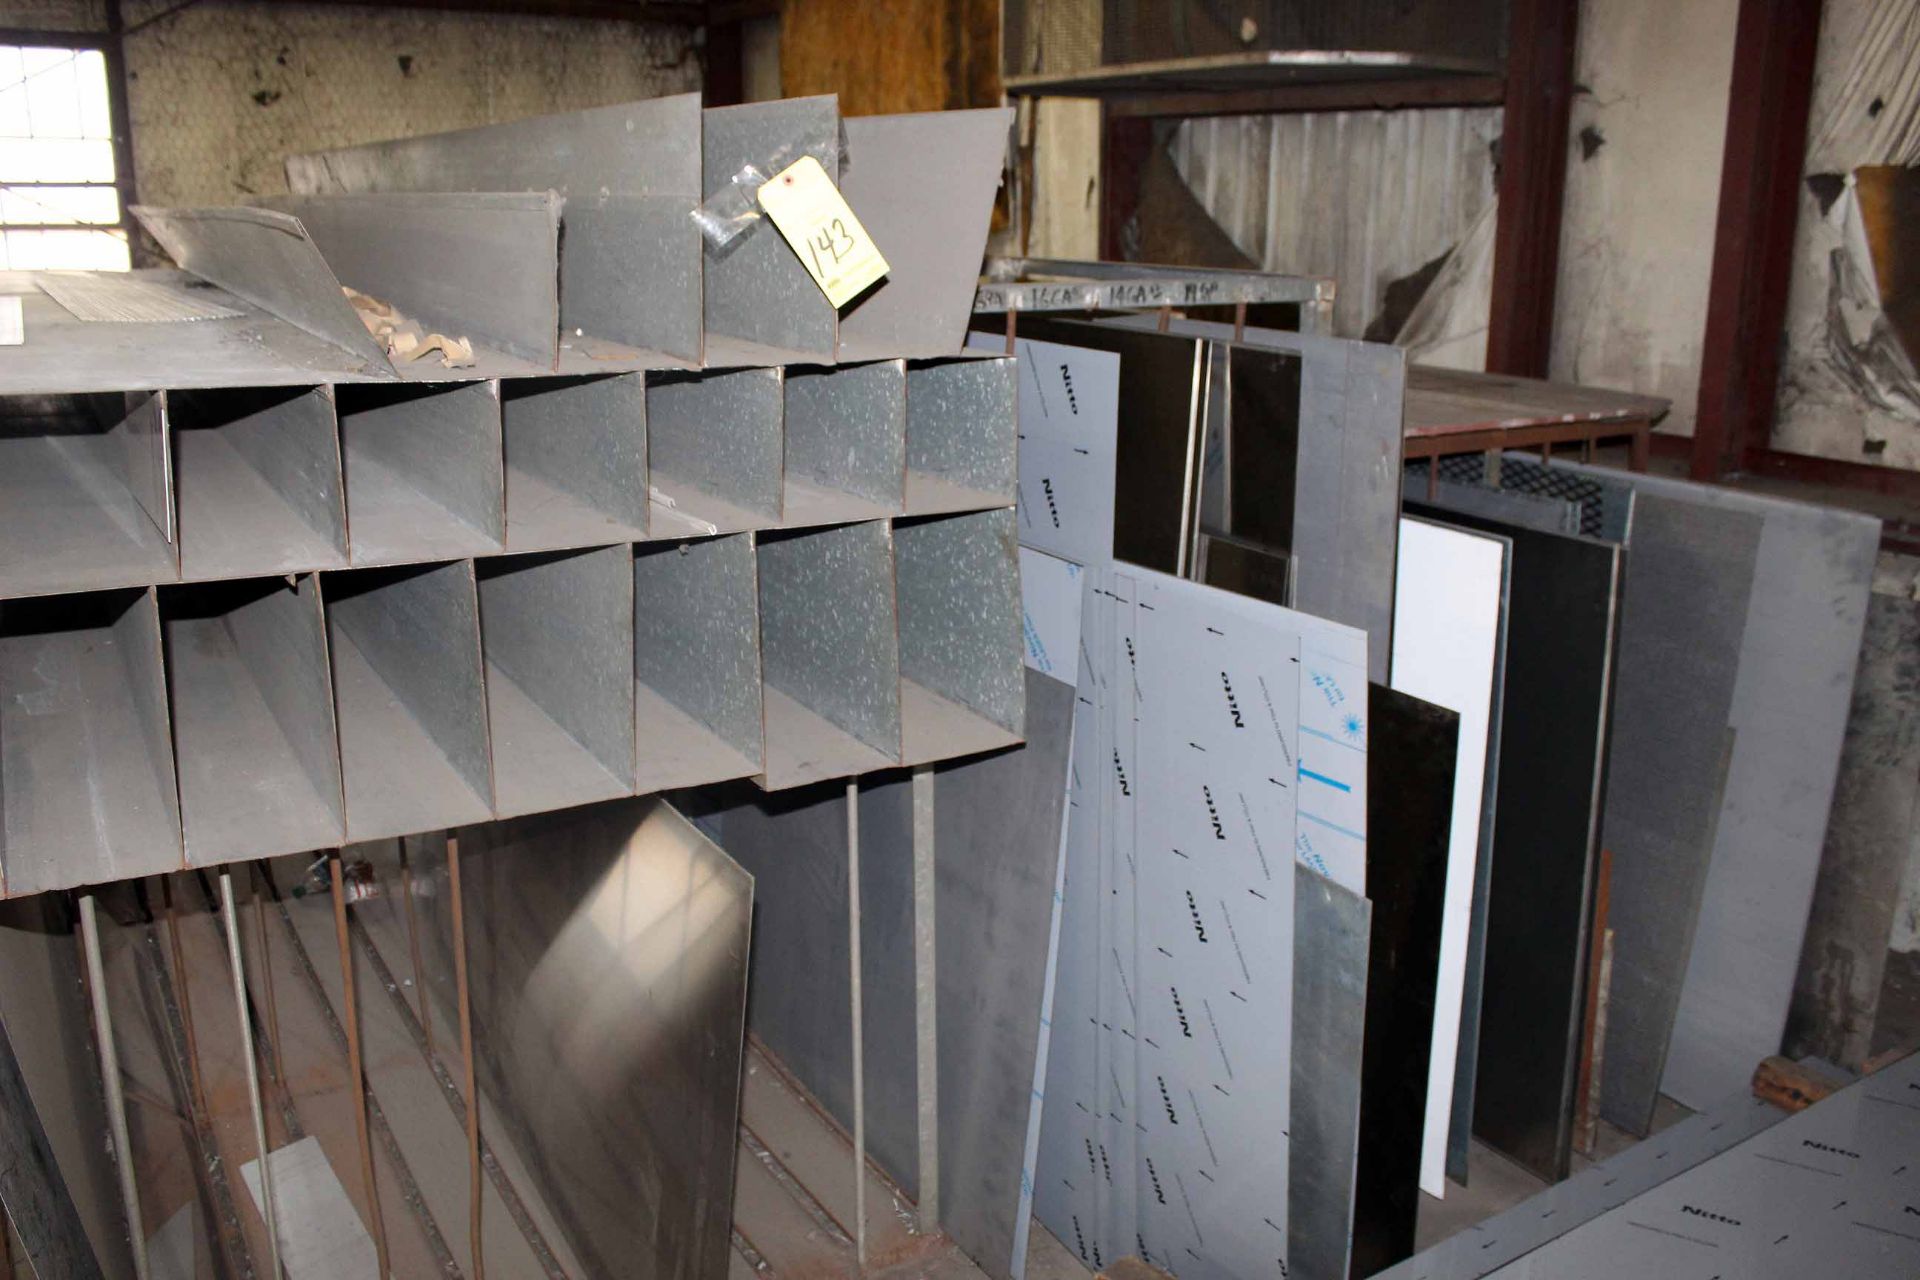 LOT OF STAINLESS STEEL SHEETS, on rack (rack included)